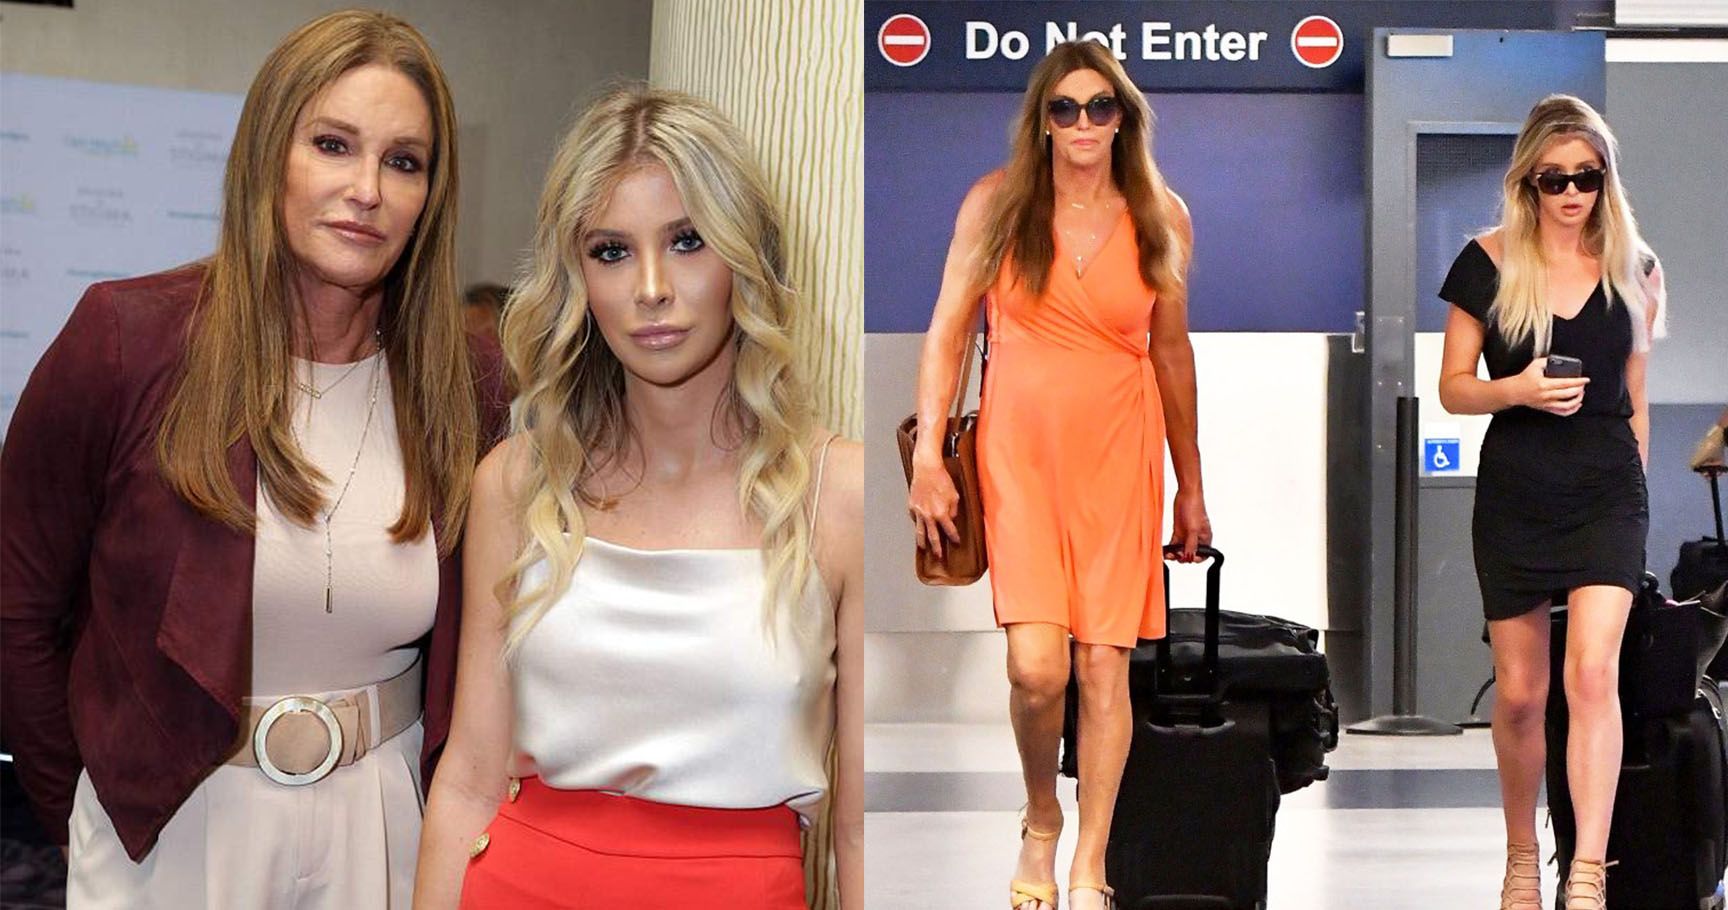 15 Sightings Of Caitlyn Jenner And Sophia Hutchinson